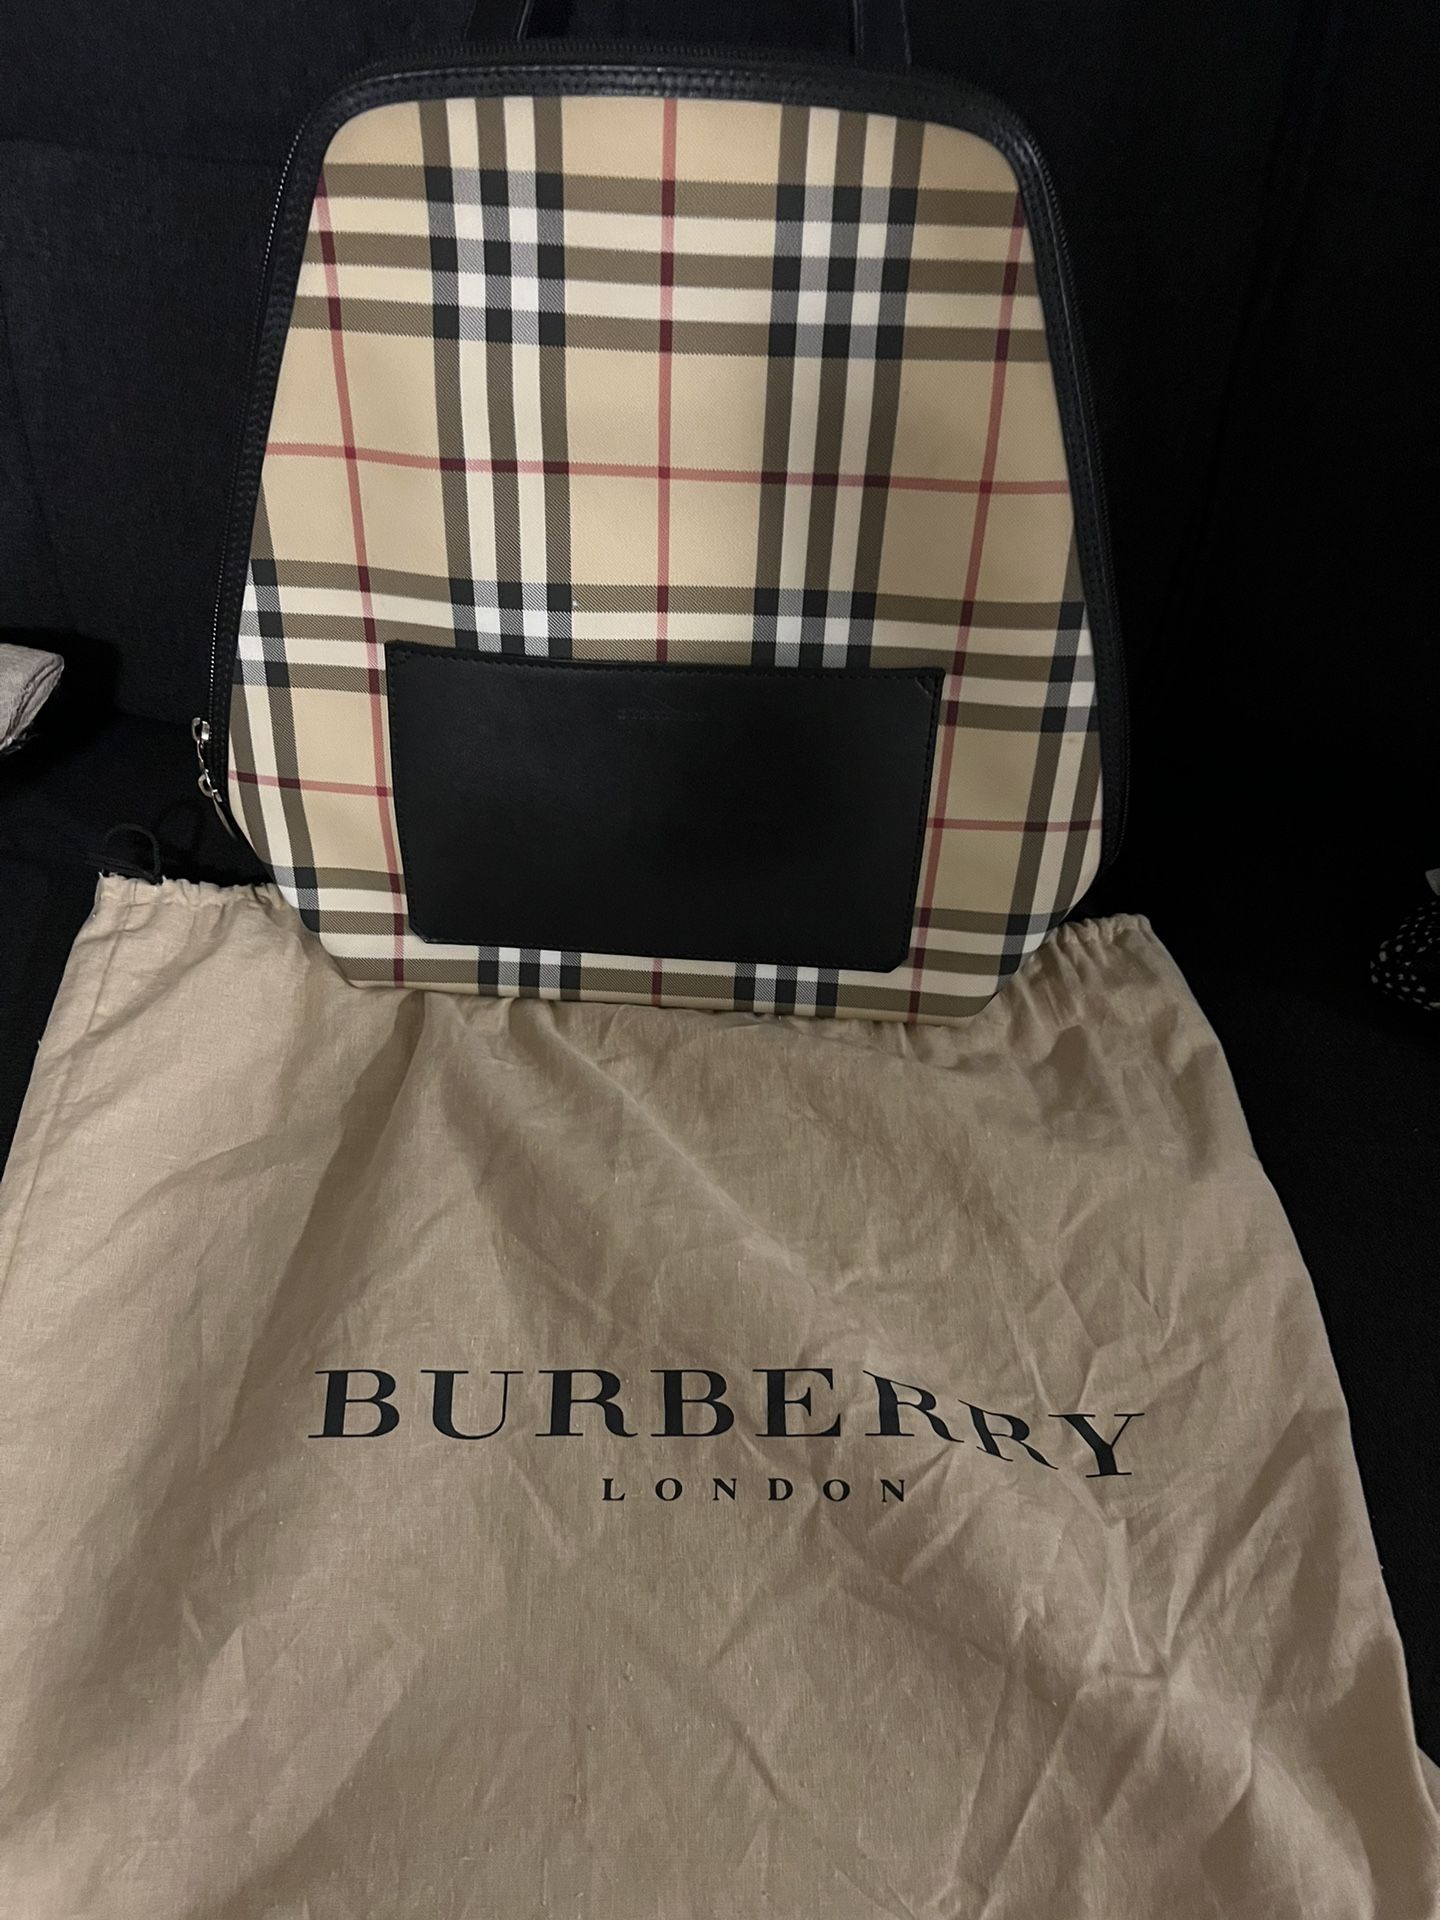 Authentic Burberry BackPack